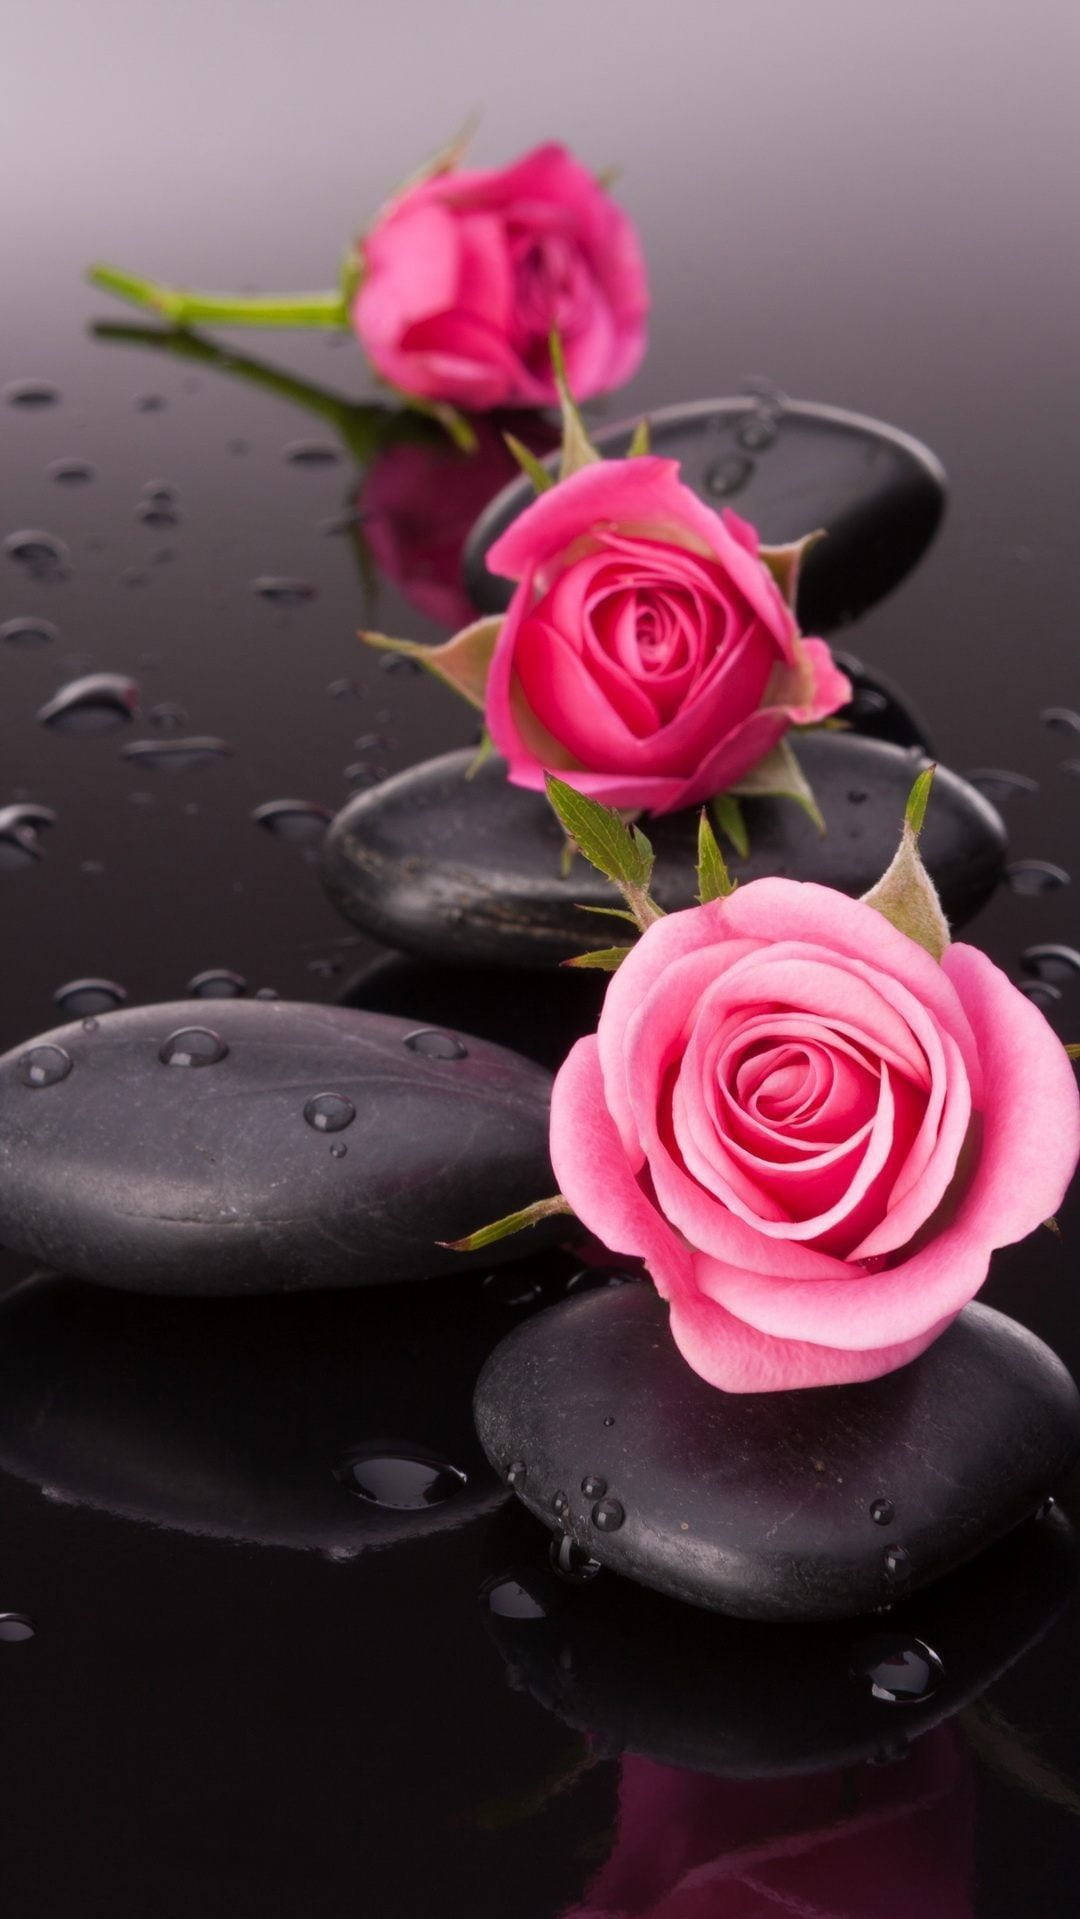 Spa Stone And Pink Roses Flower Mobile Background